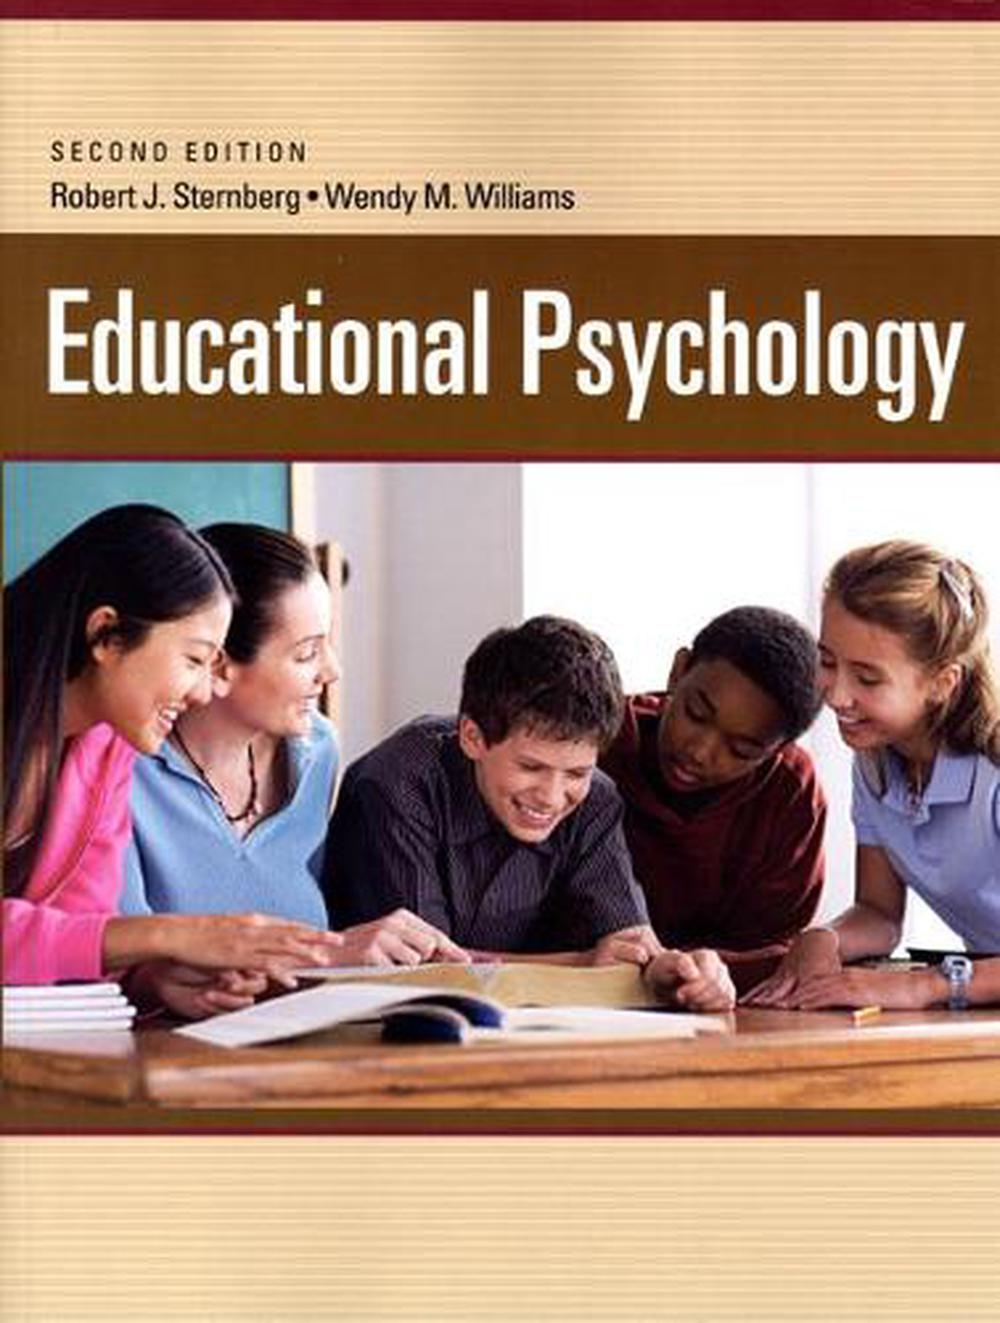 research topics on educational psychology